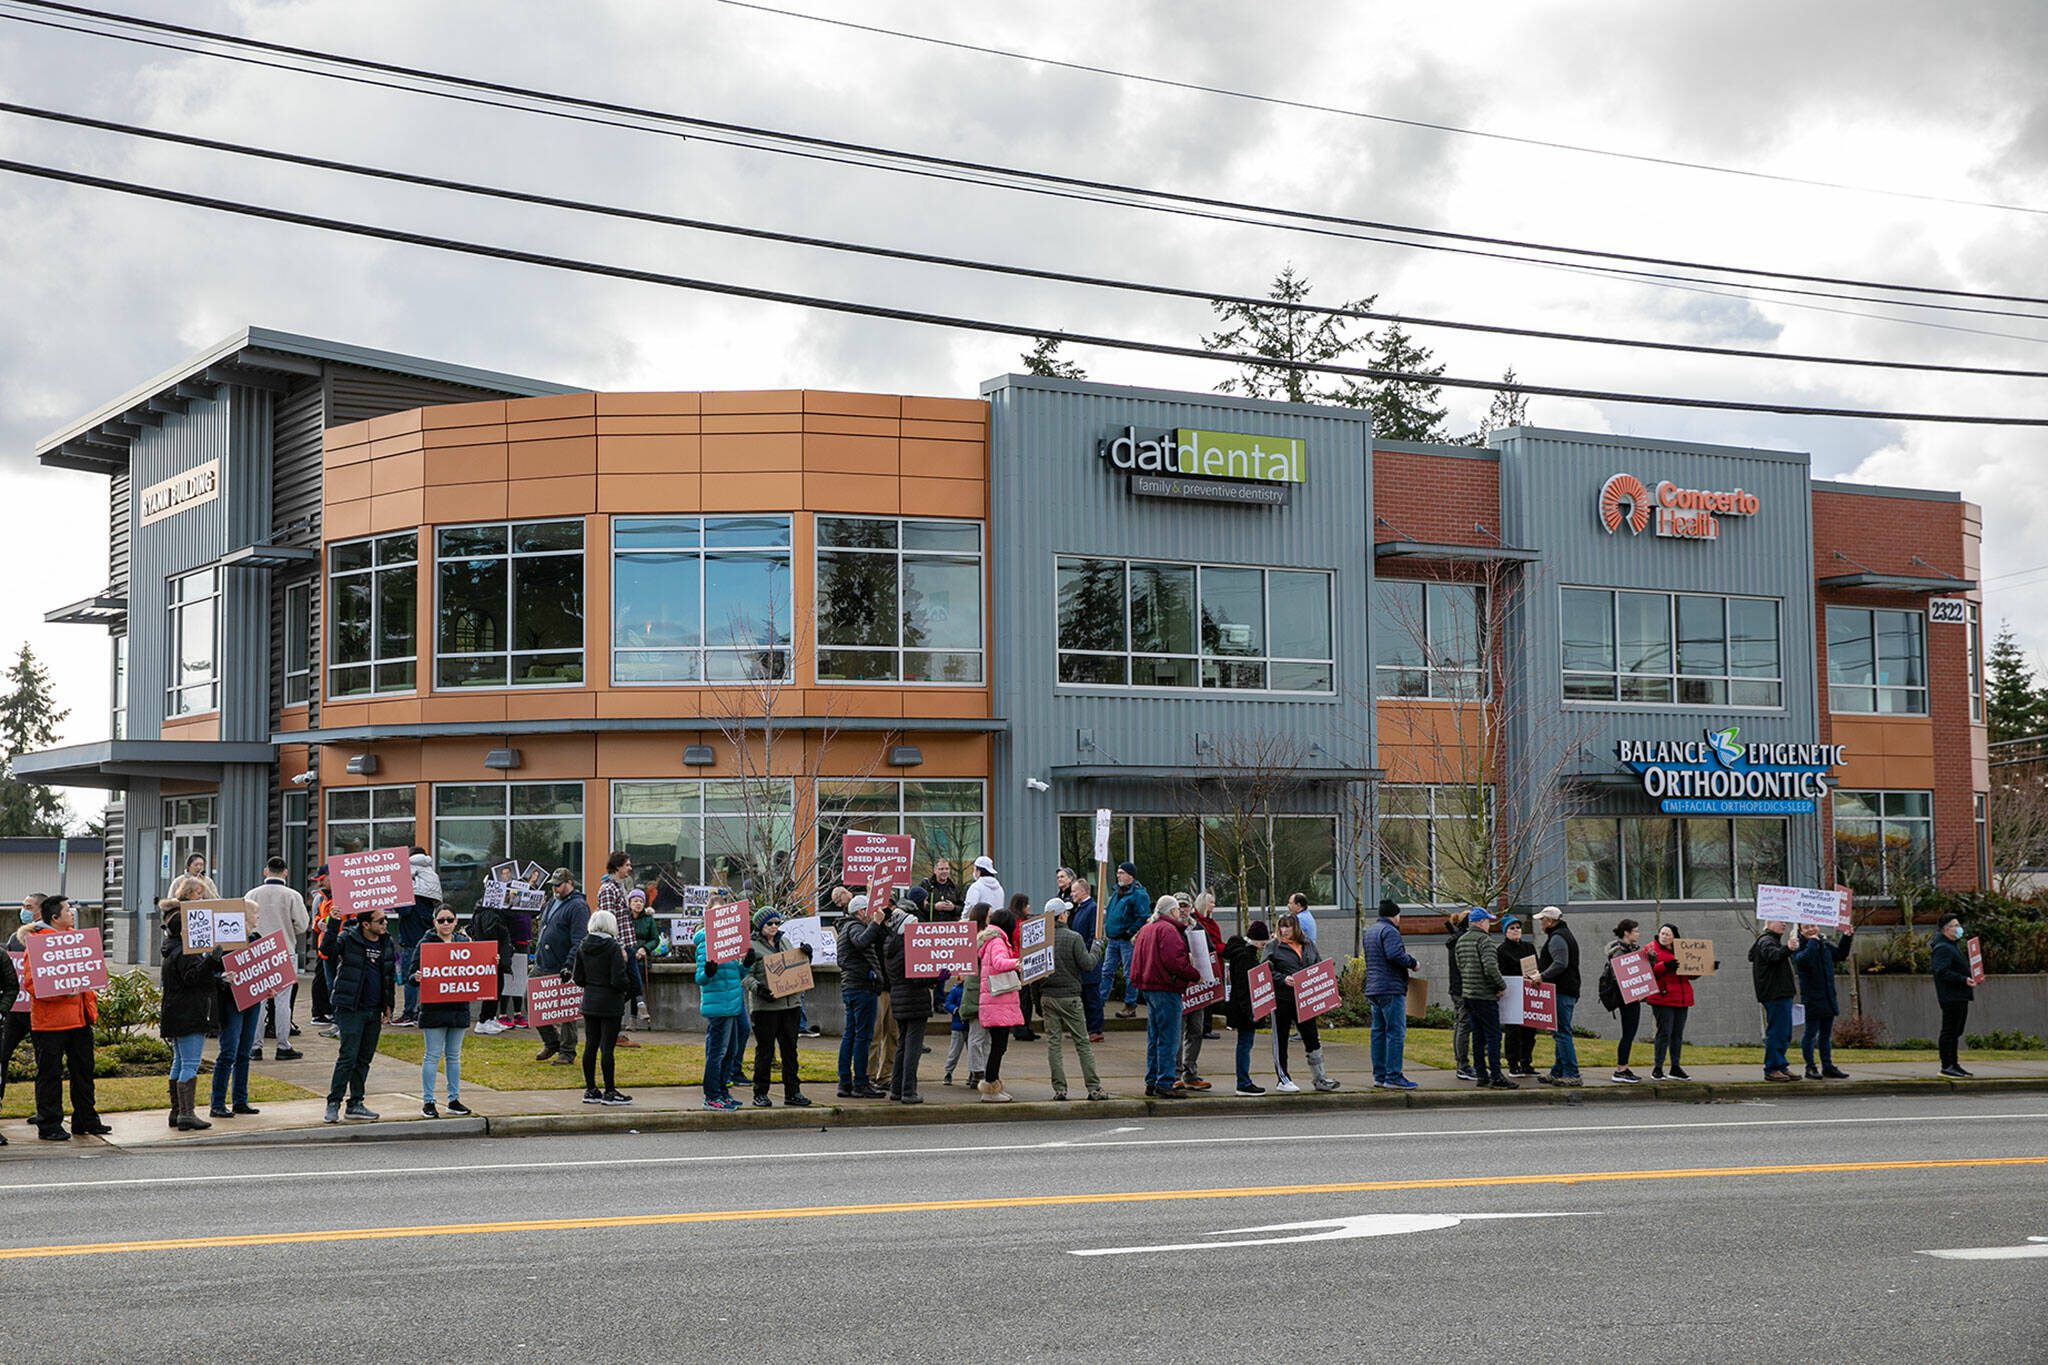 Locals from the group Safe Lynnwood gather in front of the Ryann Building on 196th Street SW to protest the opening of a methadone clinic in the building on Sunday, Jan. 22, 2023, in Lynnwood, Washington. (Ryan Berry / The Herald)